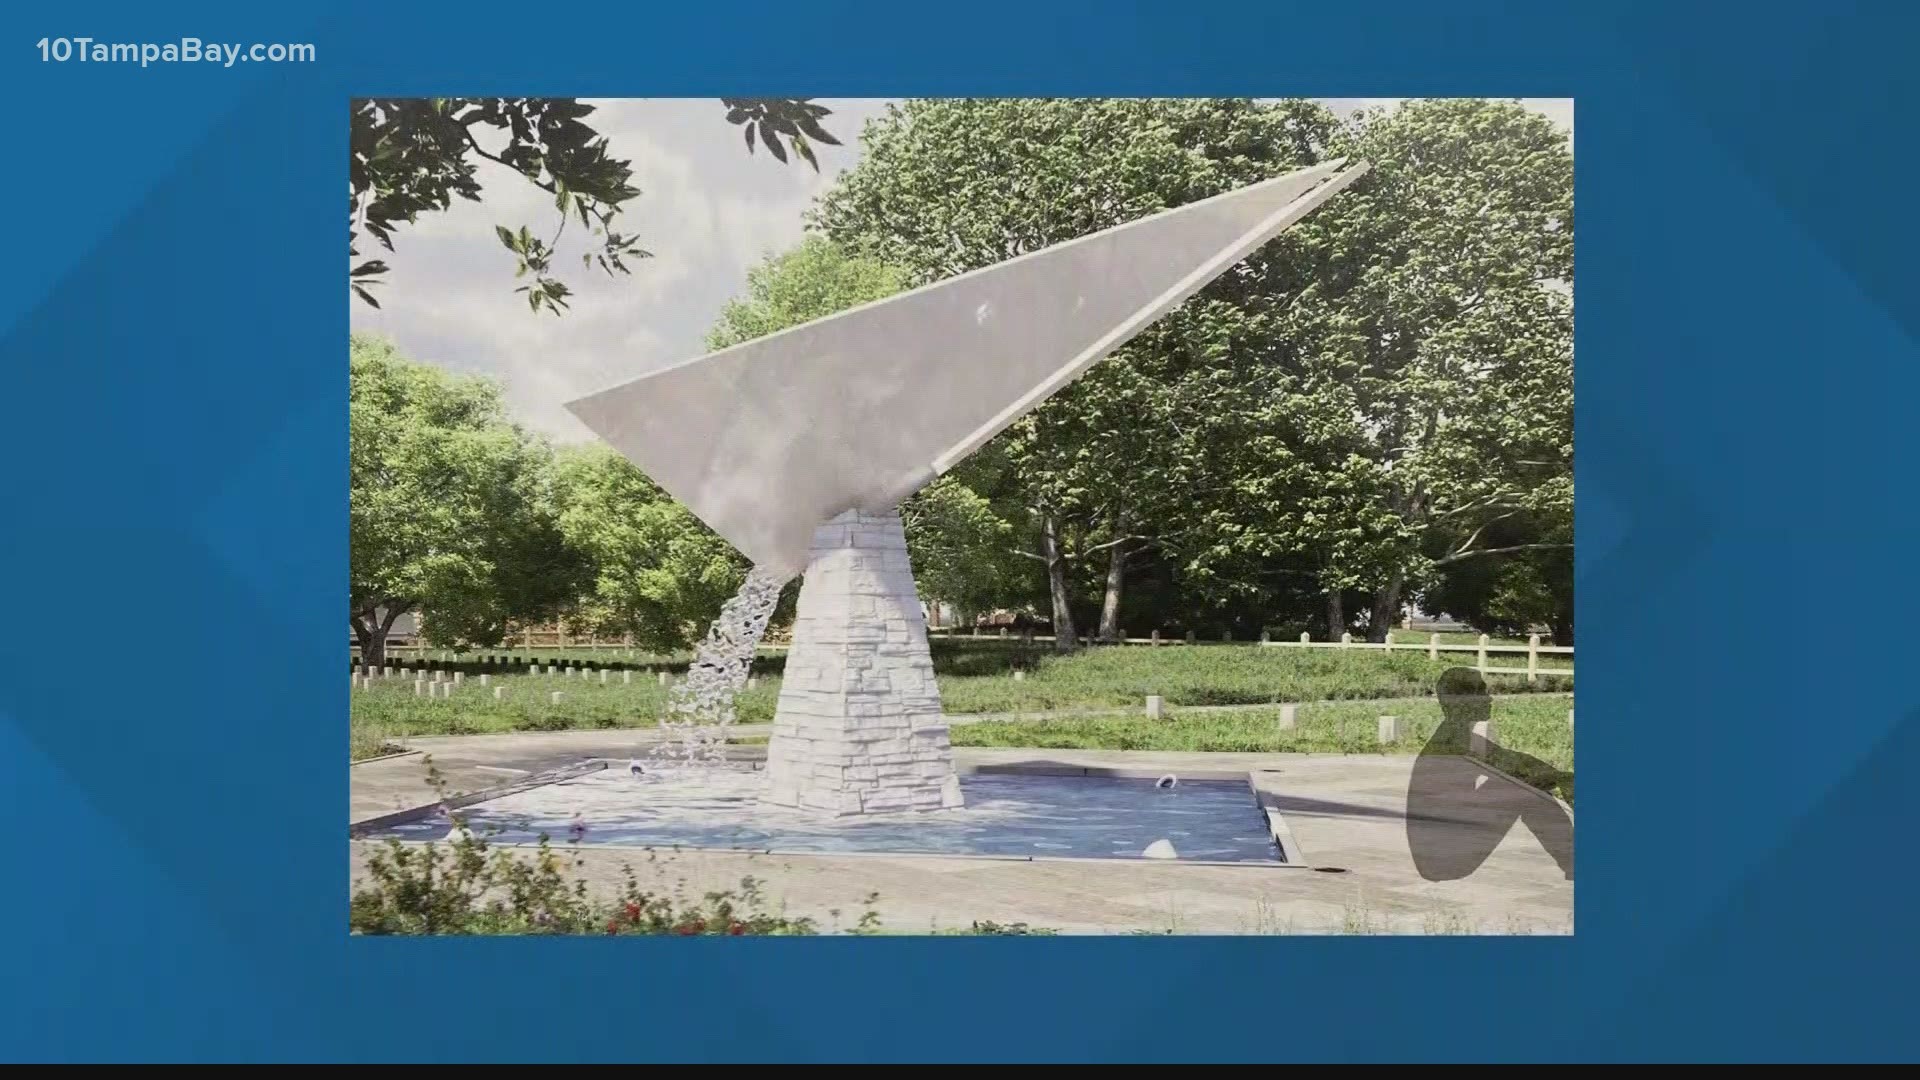 The Hillsborough County school district on Monday unveiled new renderings for a memorial to honor those buried in an erased segregation-era African American cemetery